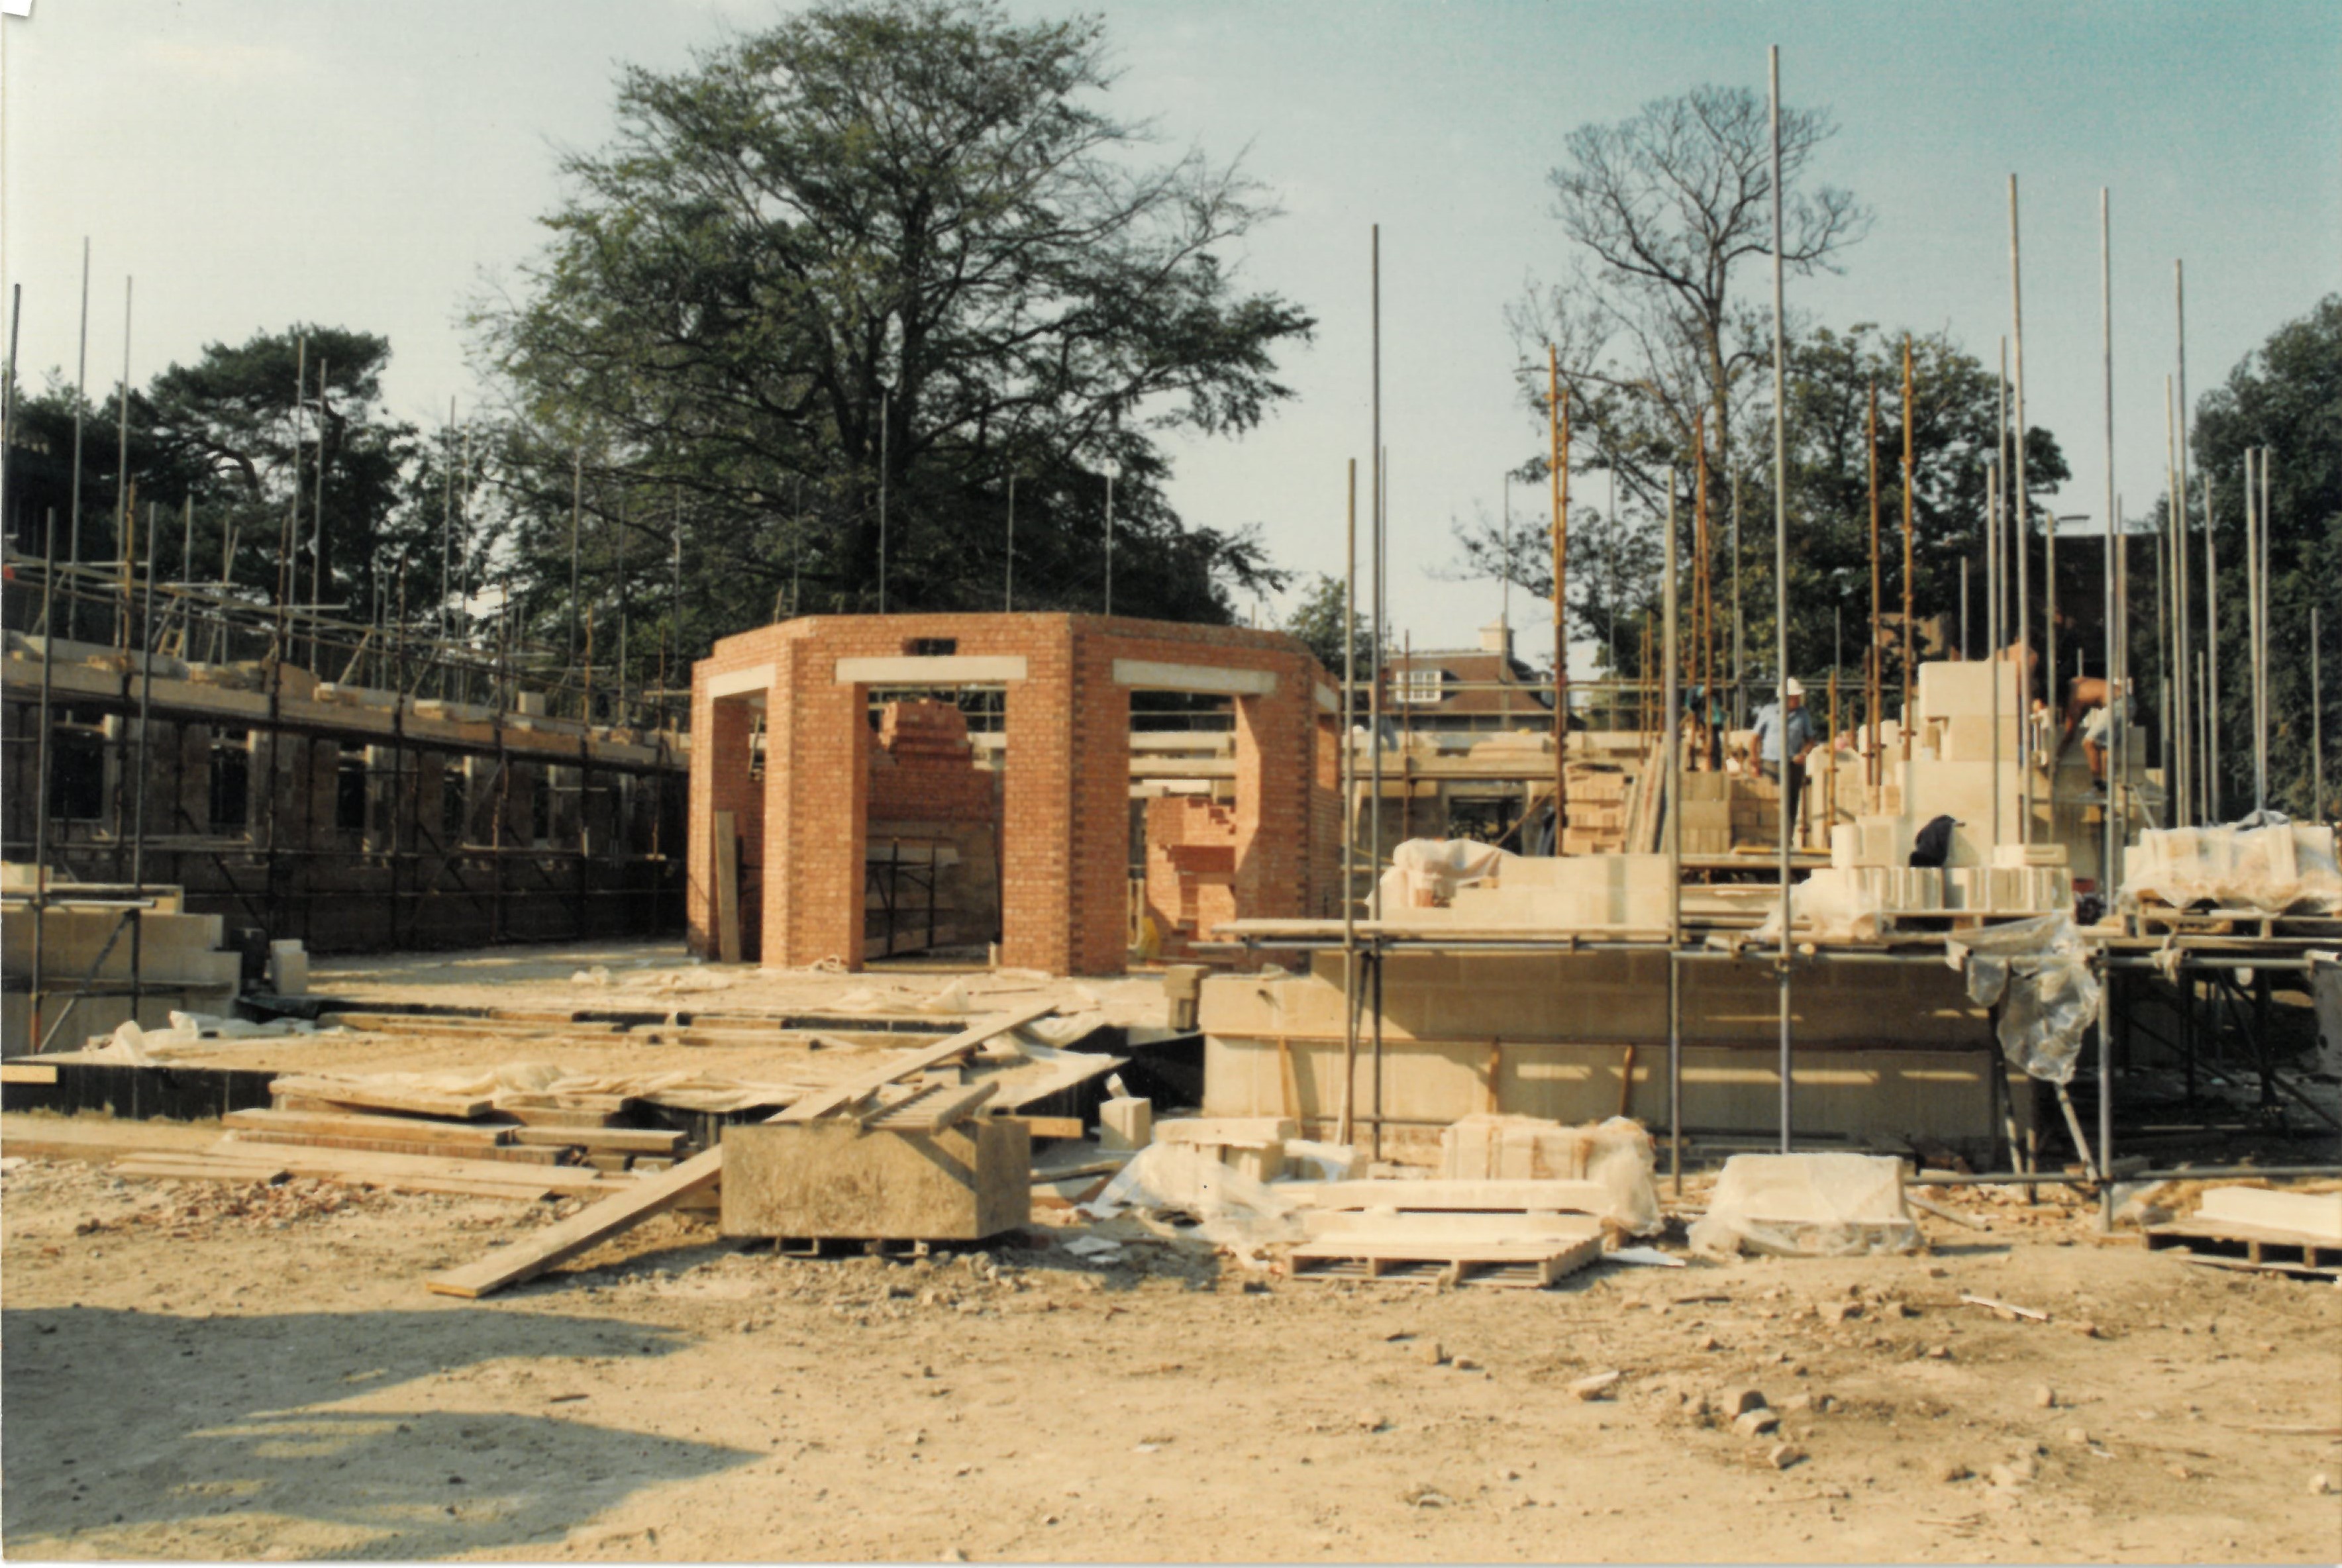 Photograph showing the early stages of building work on the Maitland Robinson Library, 1991